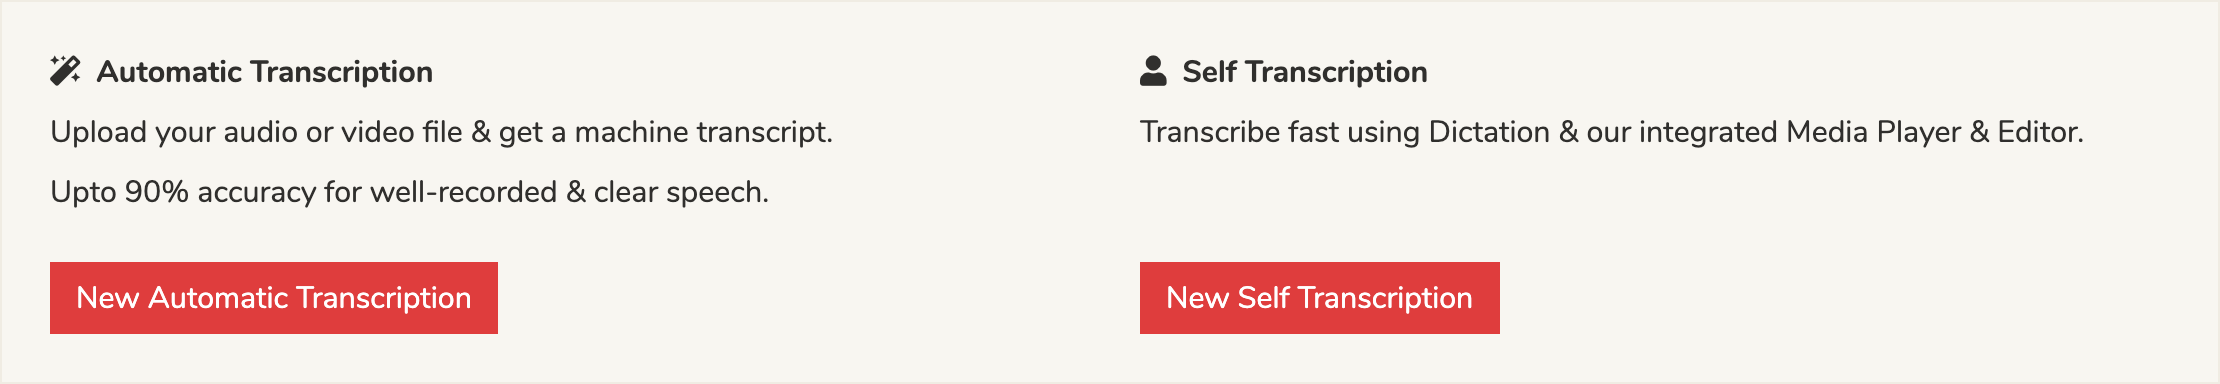 Transcribe audio to text using automatic transcription when the audio file is clear.